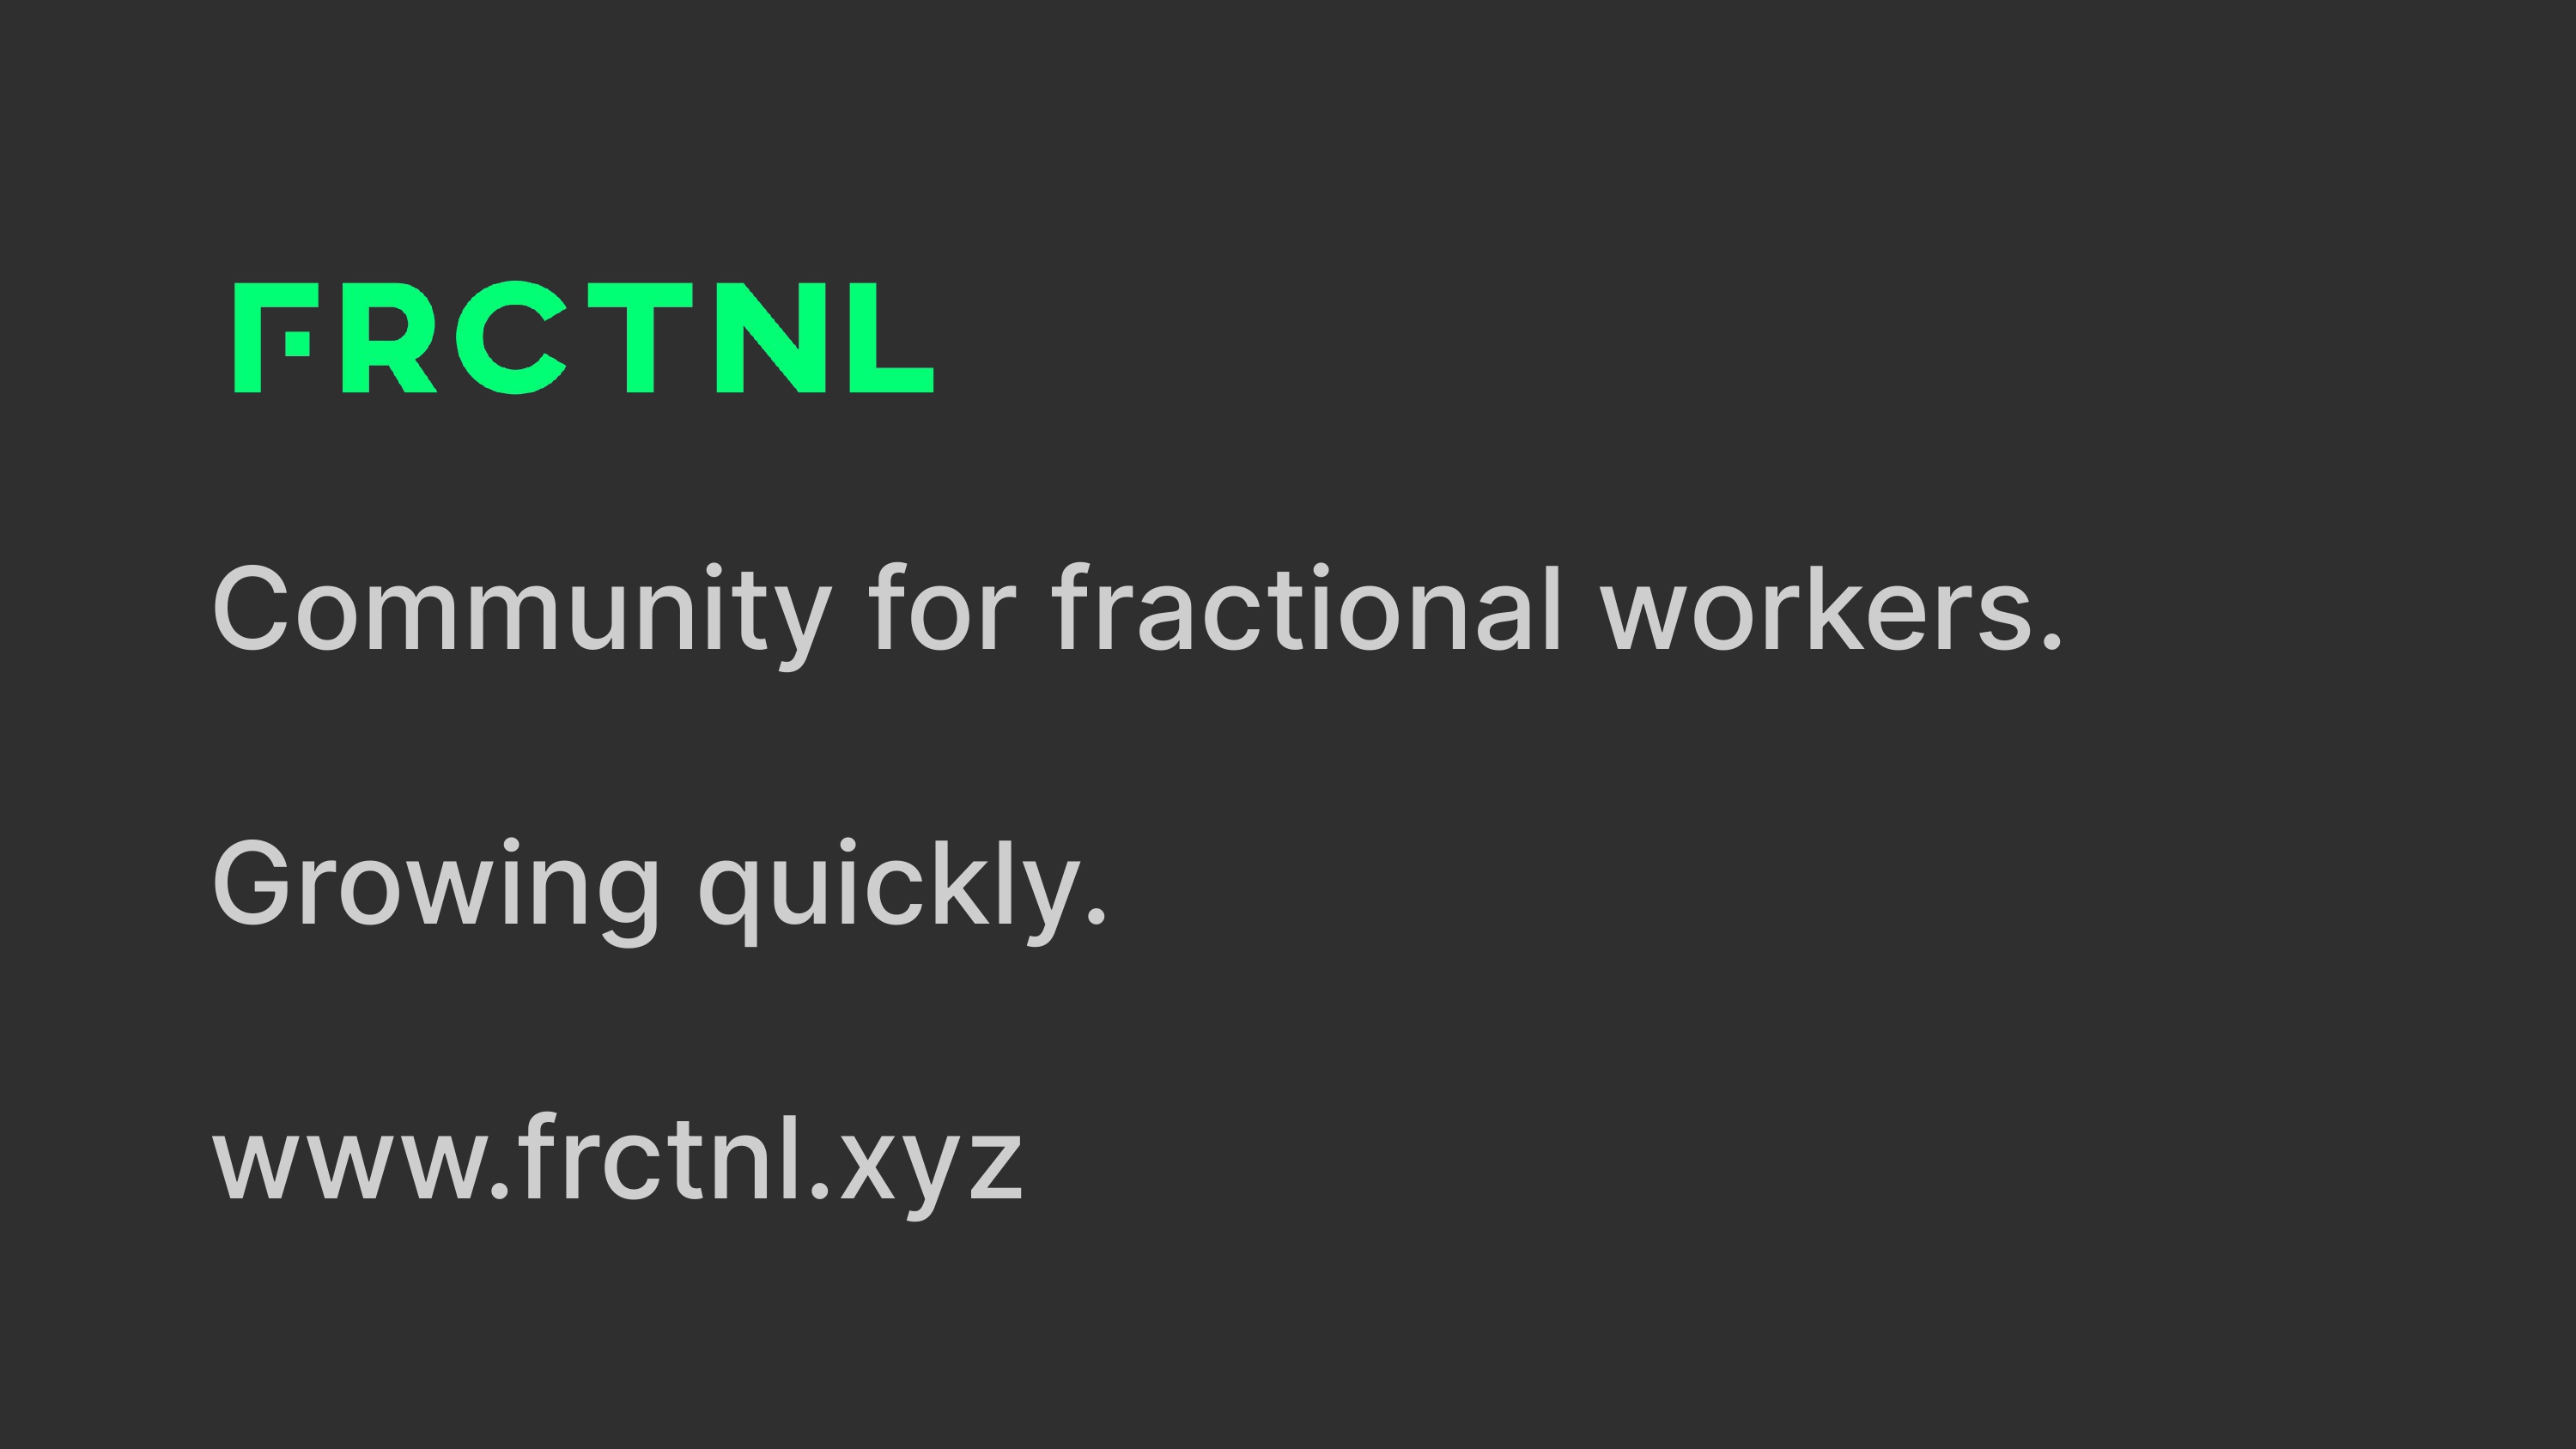 FRCTNL is a community for fractional workers I build, and is growing quickly.